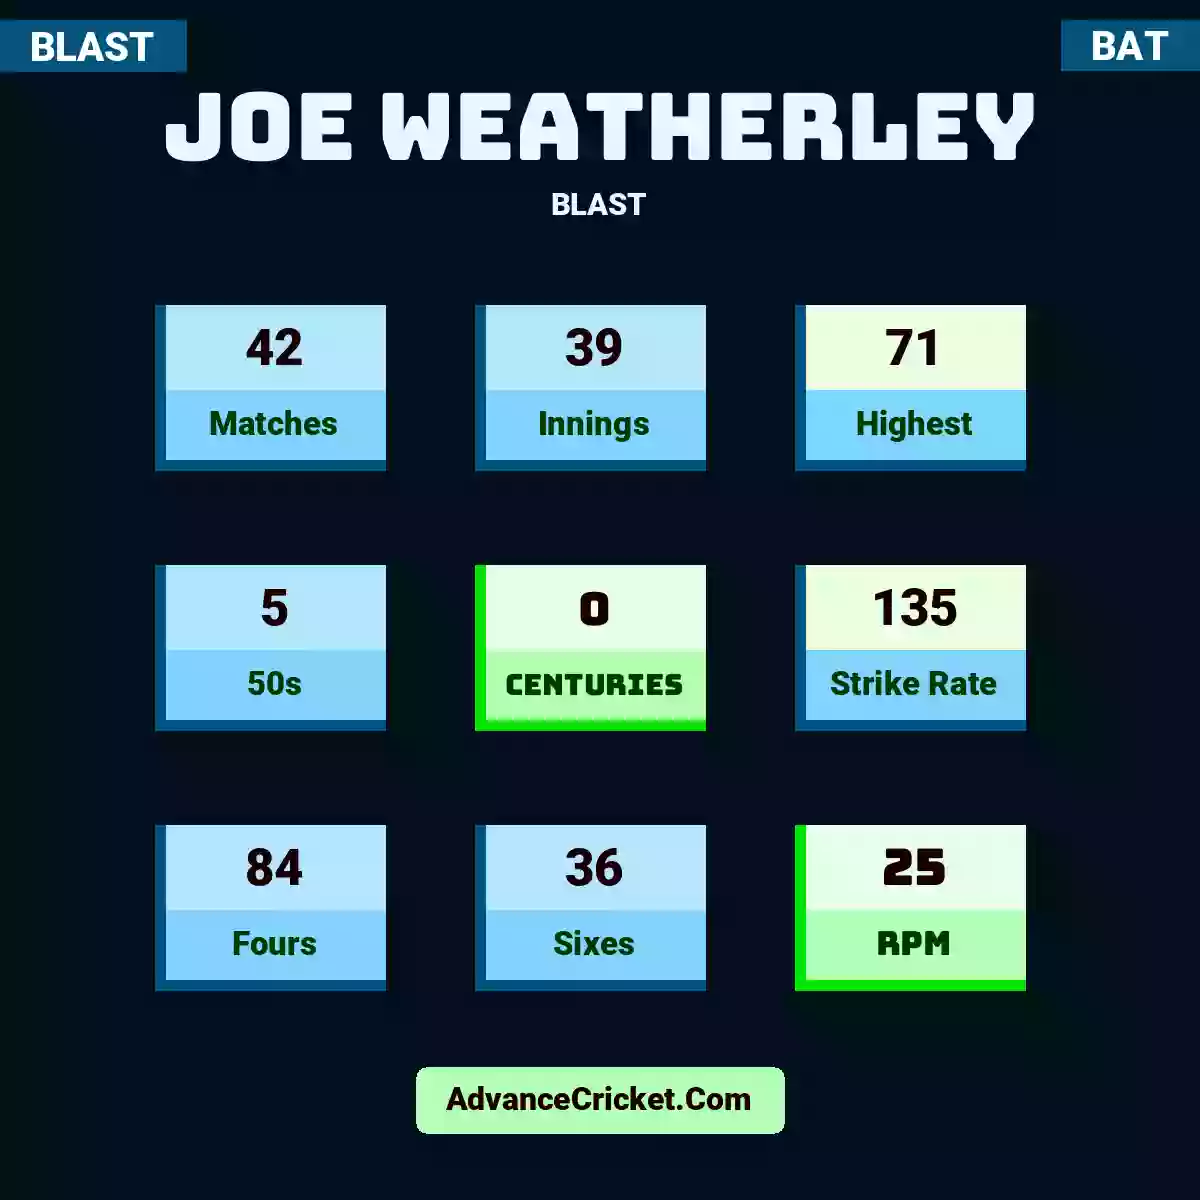 Joe Weatherley BLAST , Joe Weatherley played 42 matches, scored 71 runs as highest, 5 half-centuries, and 0 centuries, with a strike rate of 135. J.Weatherley hit 84 fours and 36 sixes, with an RPM of 25.